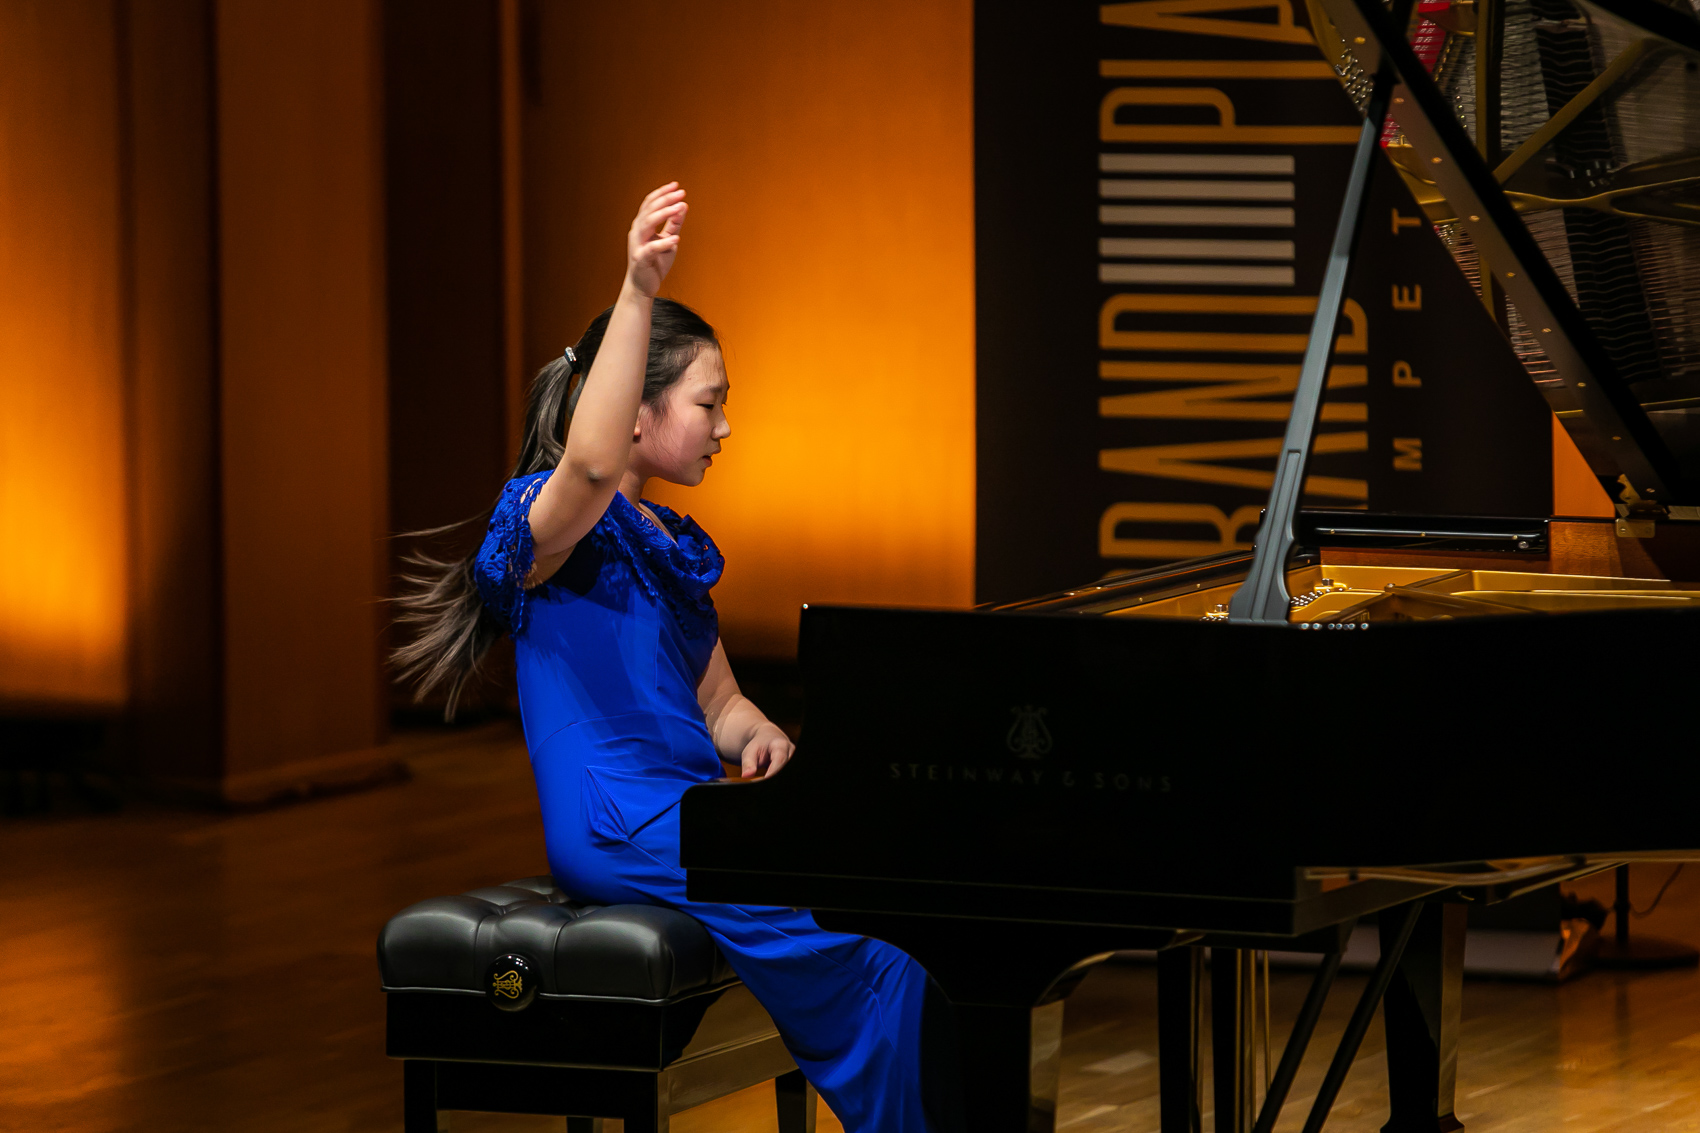 Grand competition. Гранд пиано Компетишн. Гранд пиано Компетишн 2022. «Grand Piano Competition» фестиваль.